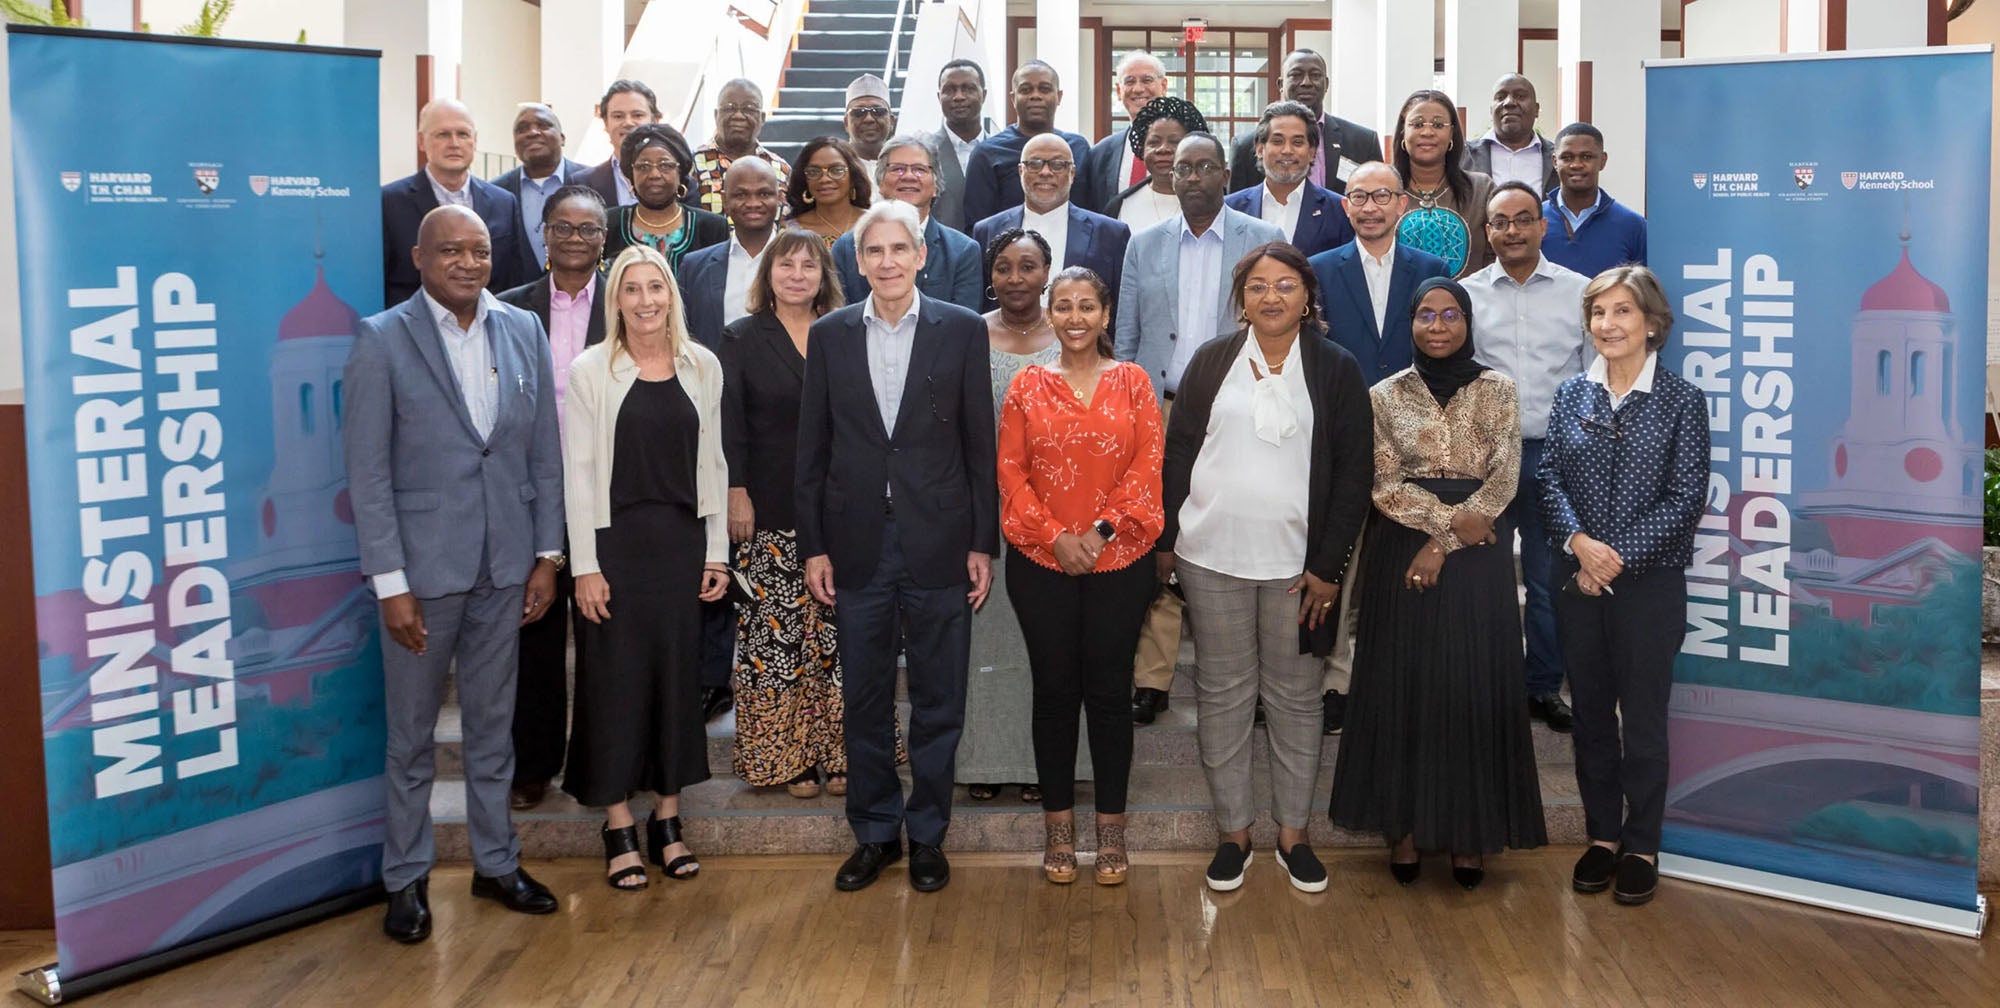 The 2022 cohort of Ministers pose for a group photo during the Harvard Ministerial Forum for Sectoral Ministers.